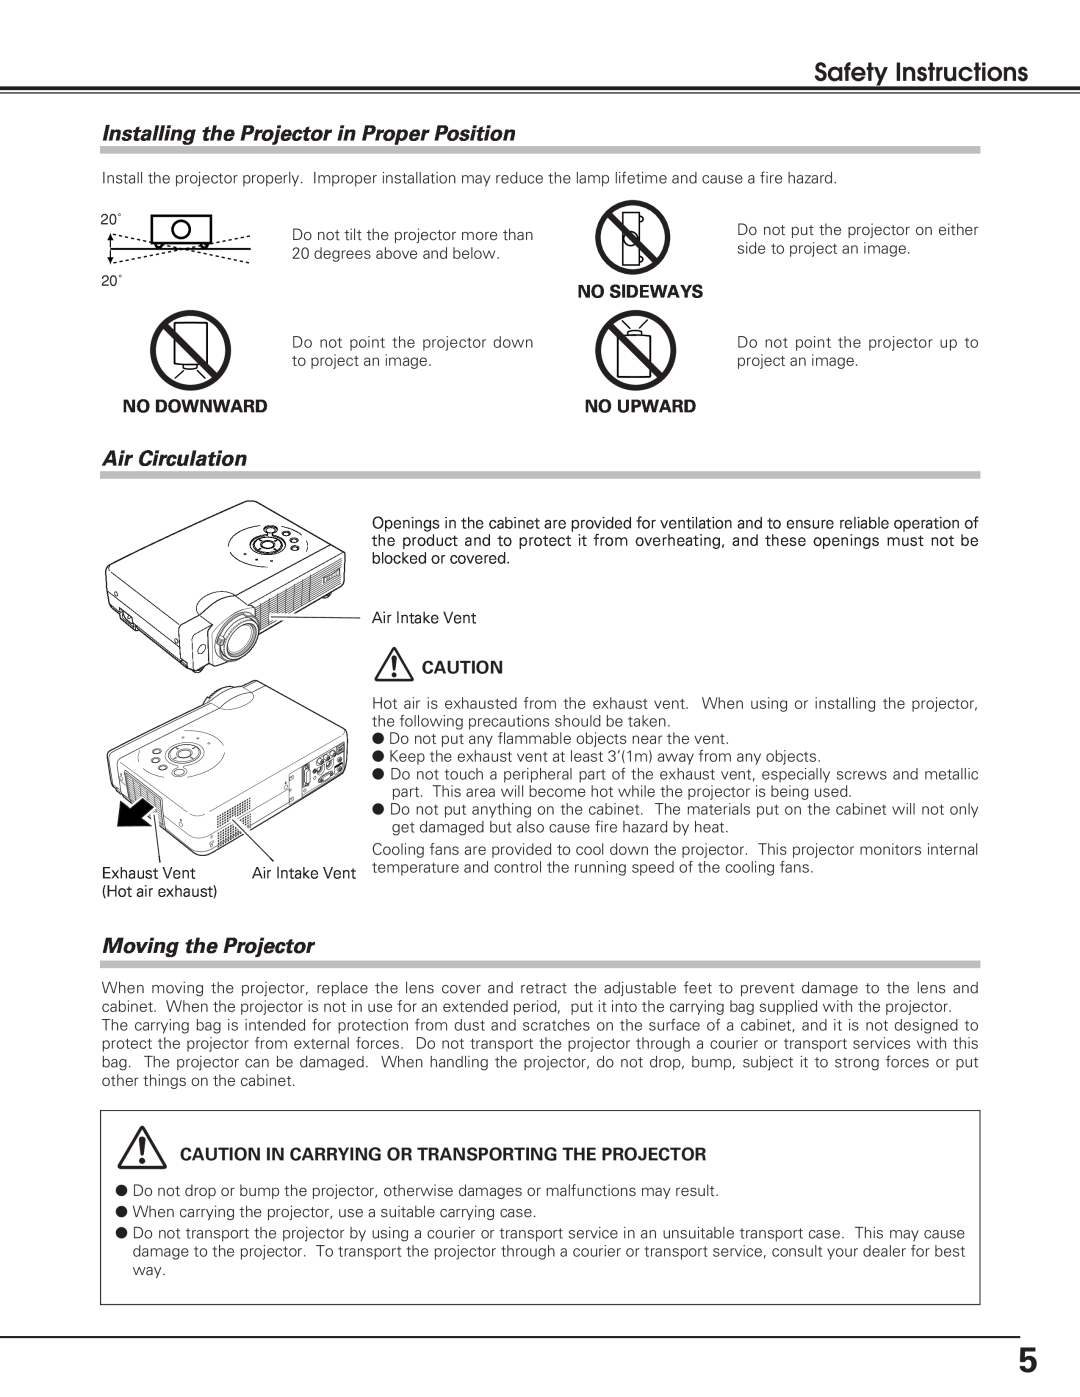 Eiki LC-XB20 Safety Instructions, Installing the Projector in Proper Position, Air Circulation, Moving the Projector 